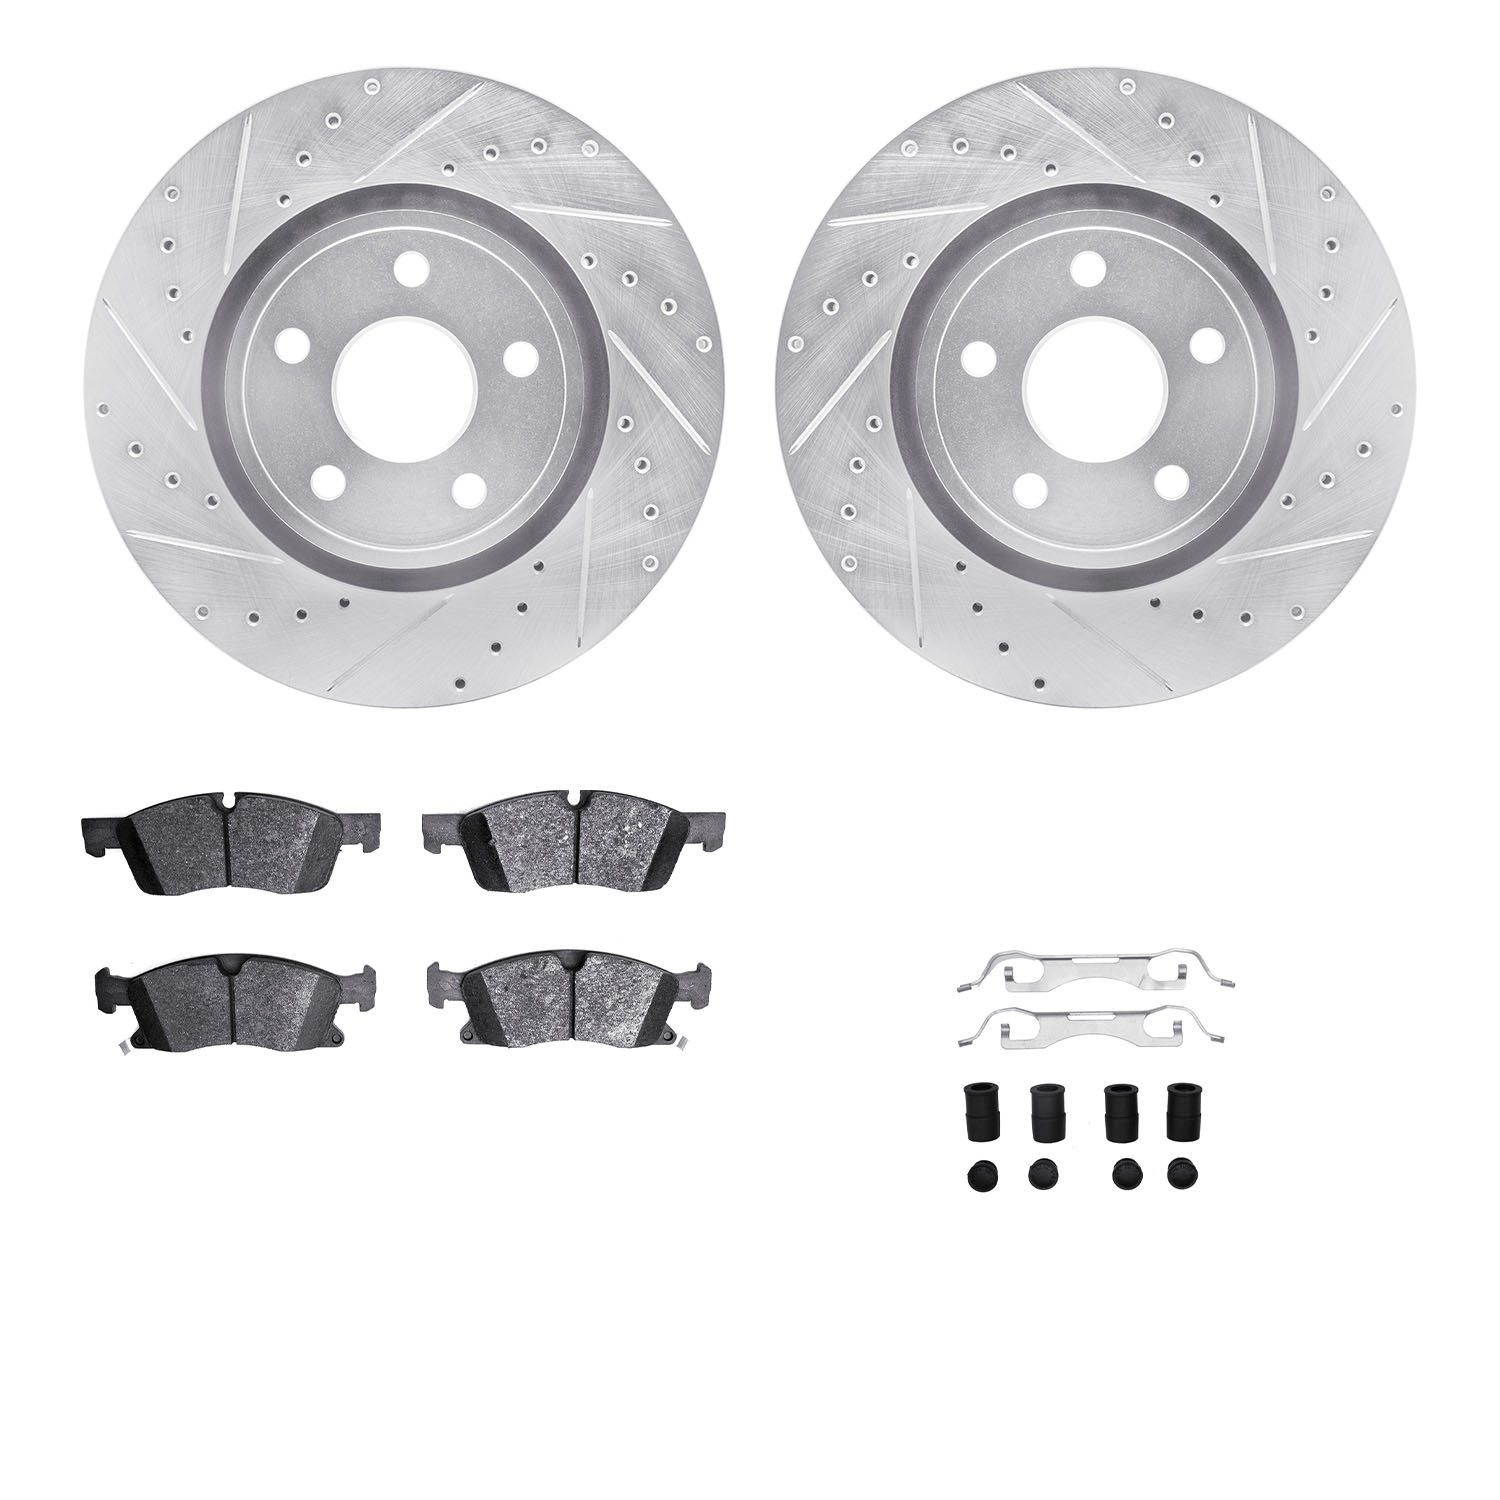 7312-42049 Drilled/Slotted Brake Rotor with 3000-Series Ceramic Brake Pads Kit & Hardware [Silver], Fits Select Mopar, Position: